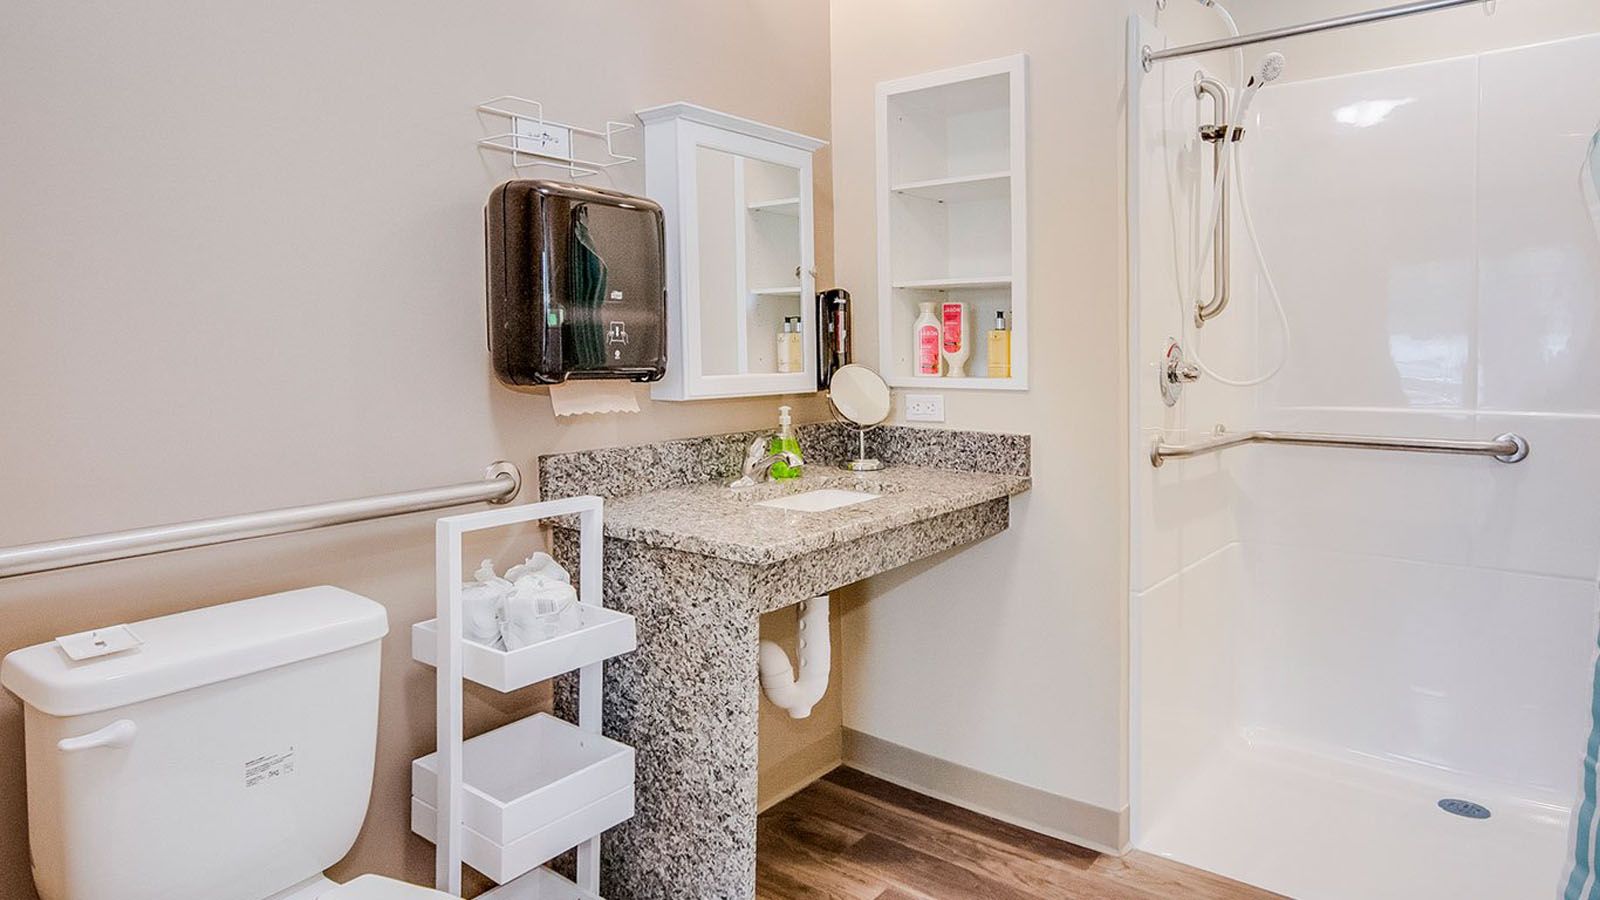 Interior view of a bathroom with modern design at Grandhaven Living Center, featuring a corner sink.